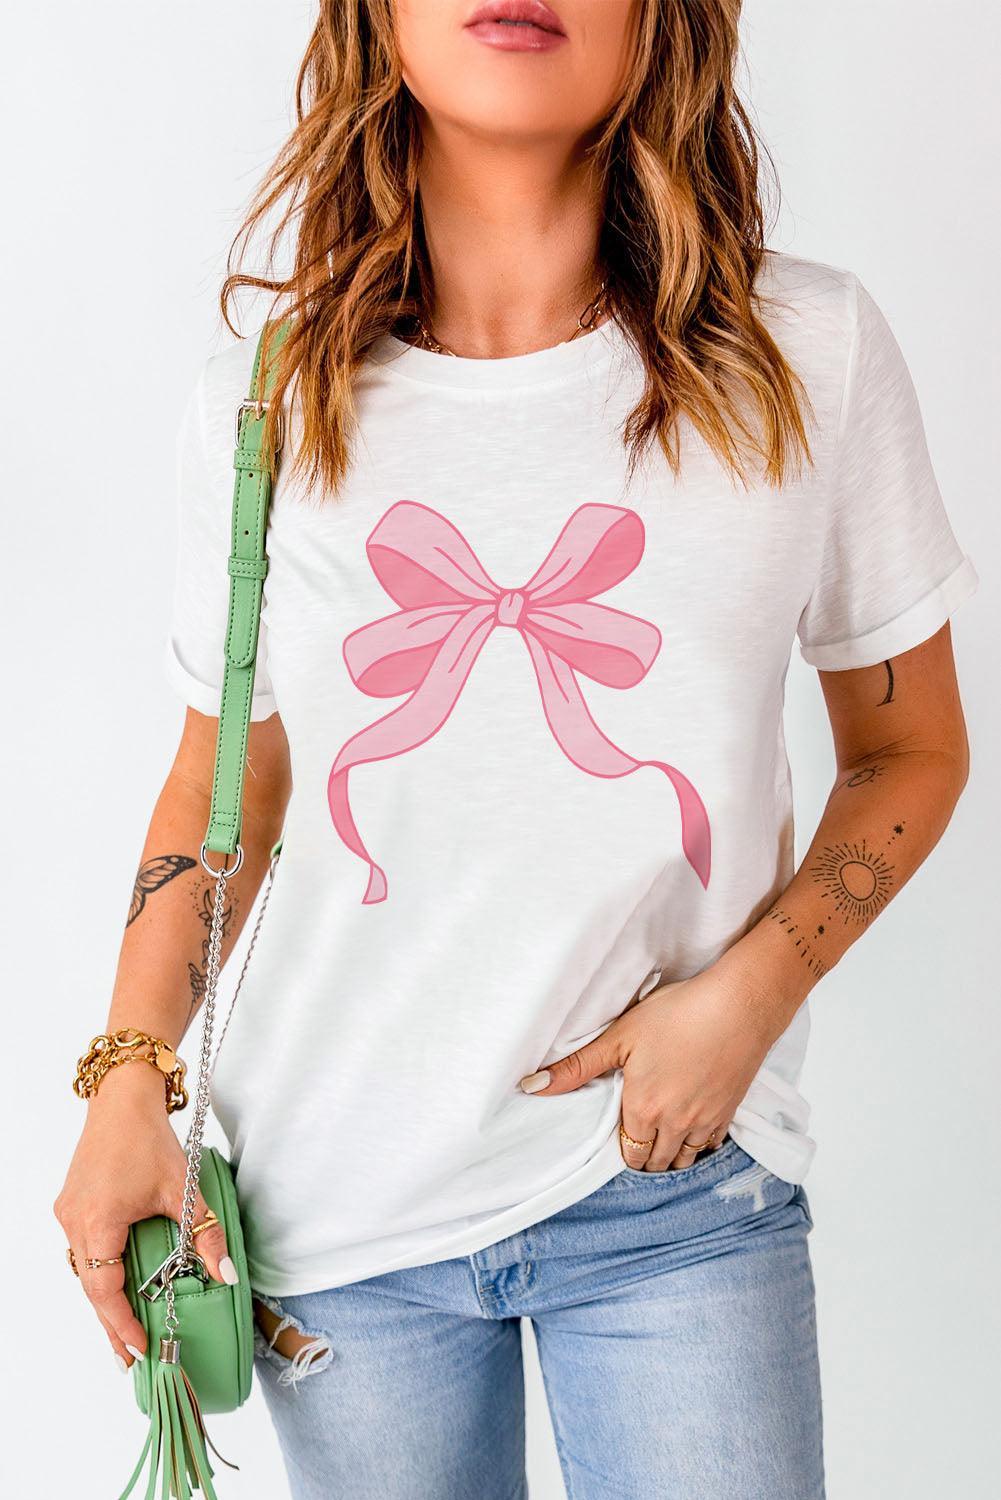 White Casual Flowing Bow Knot Graphic Round Neck Tee - Ninonine